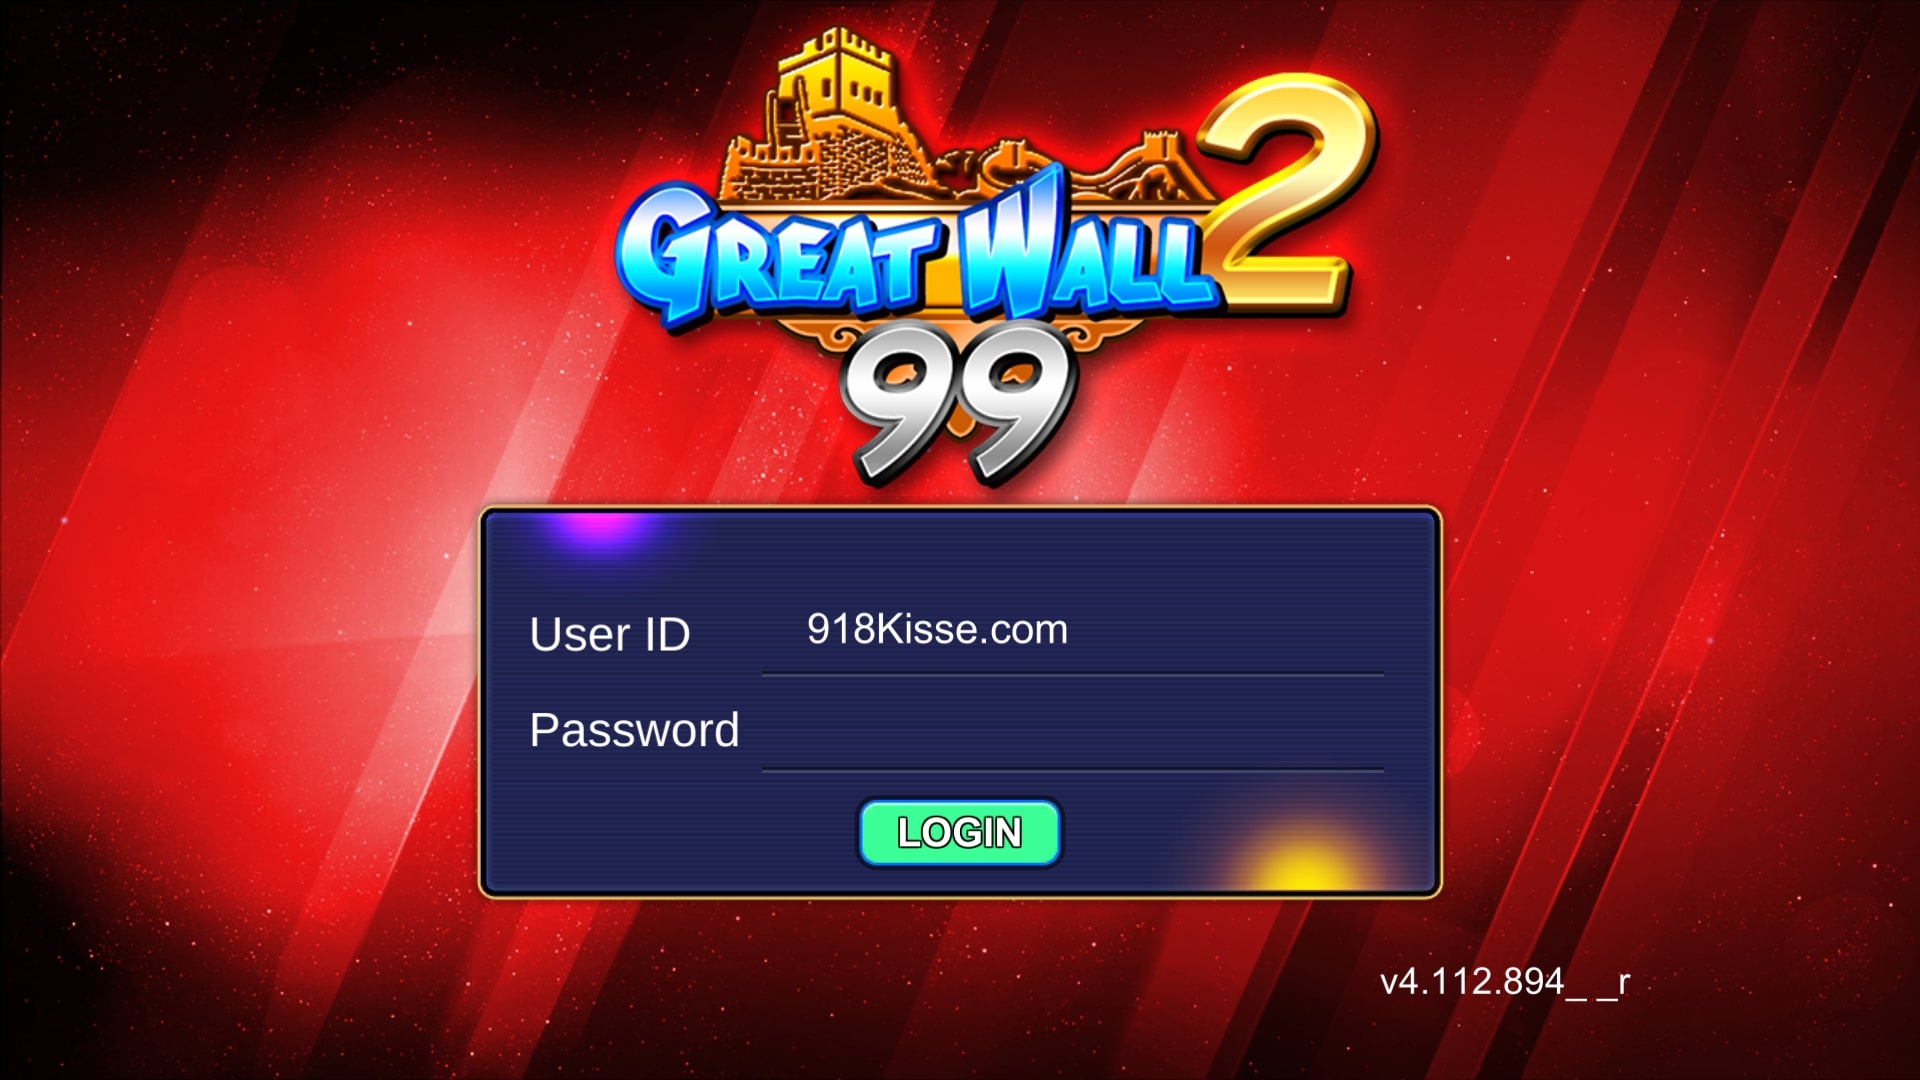 GreatWall99  Download 2020 APK Android and iOS